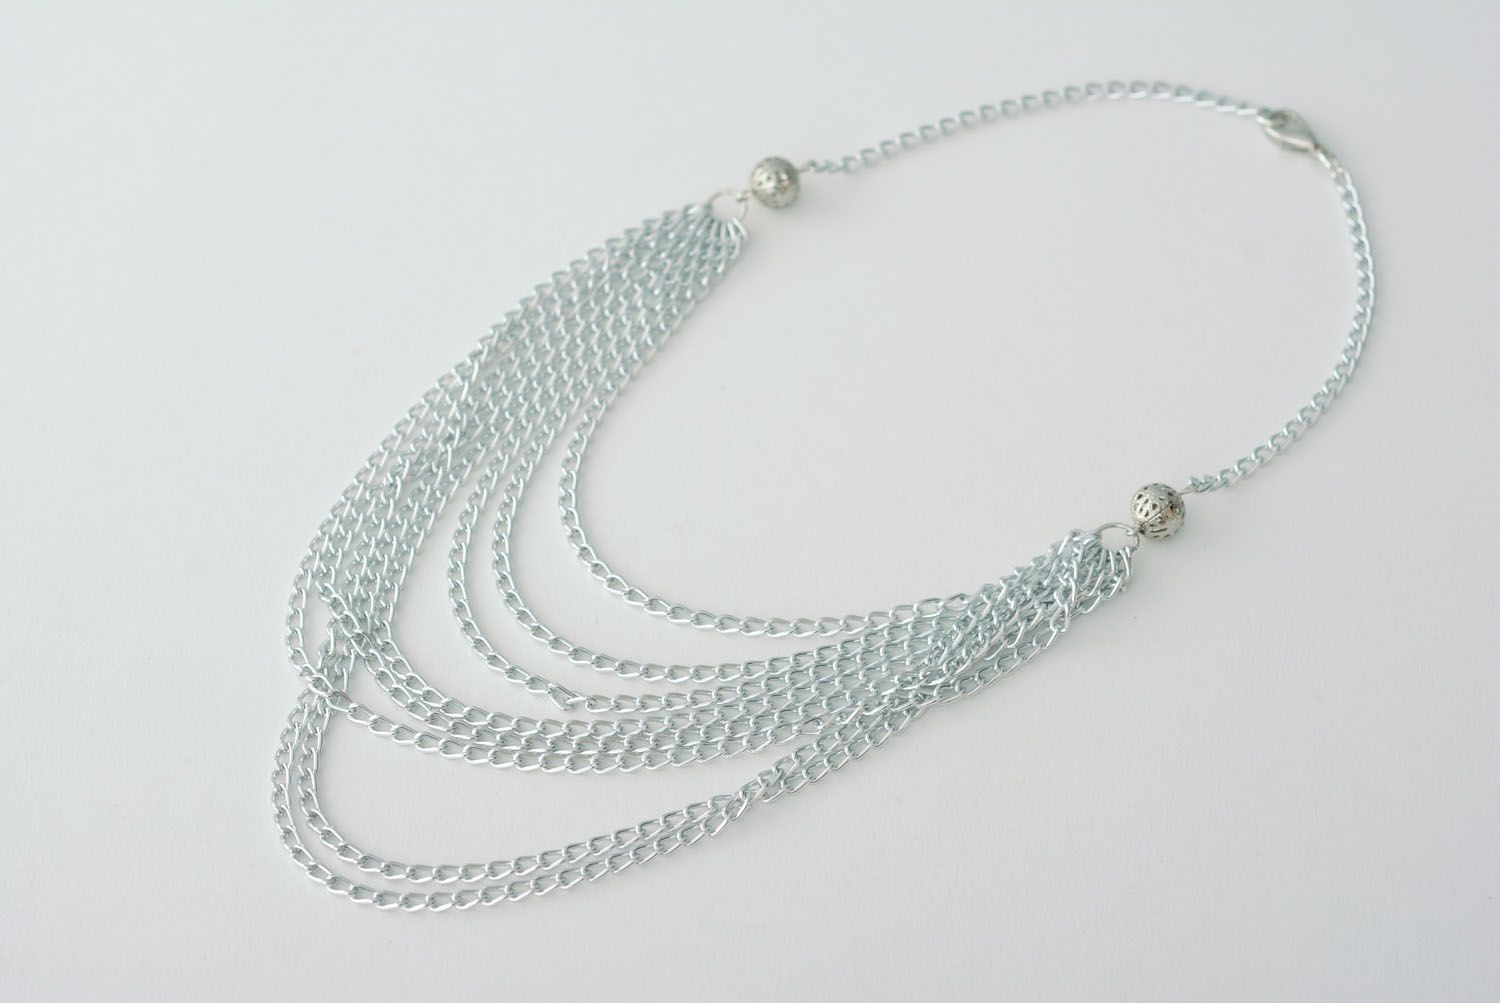 Women's necklace made of chains photo 3